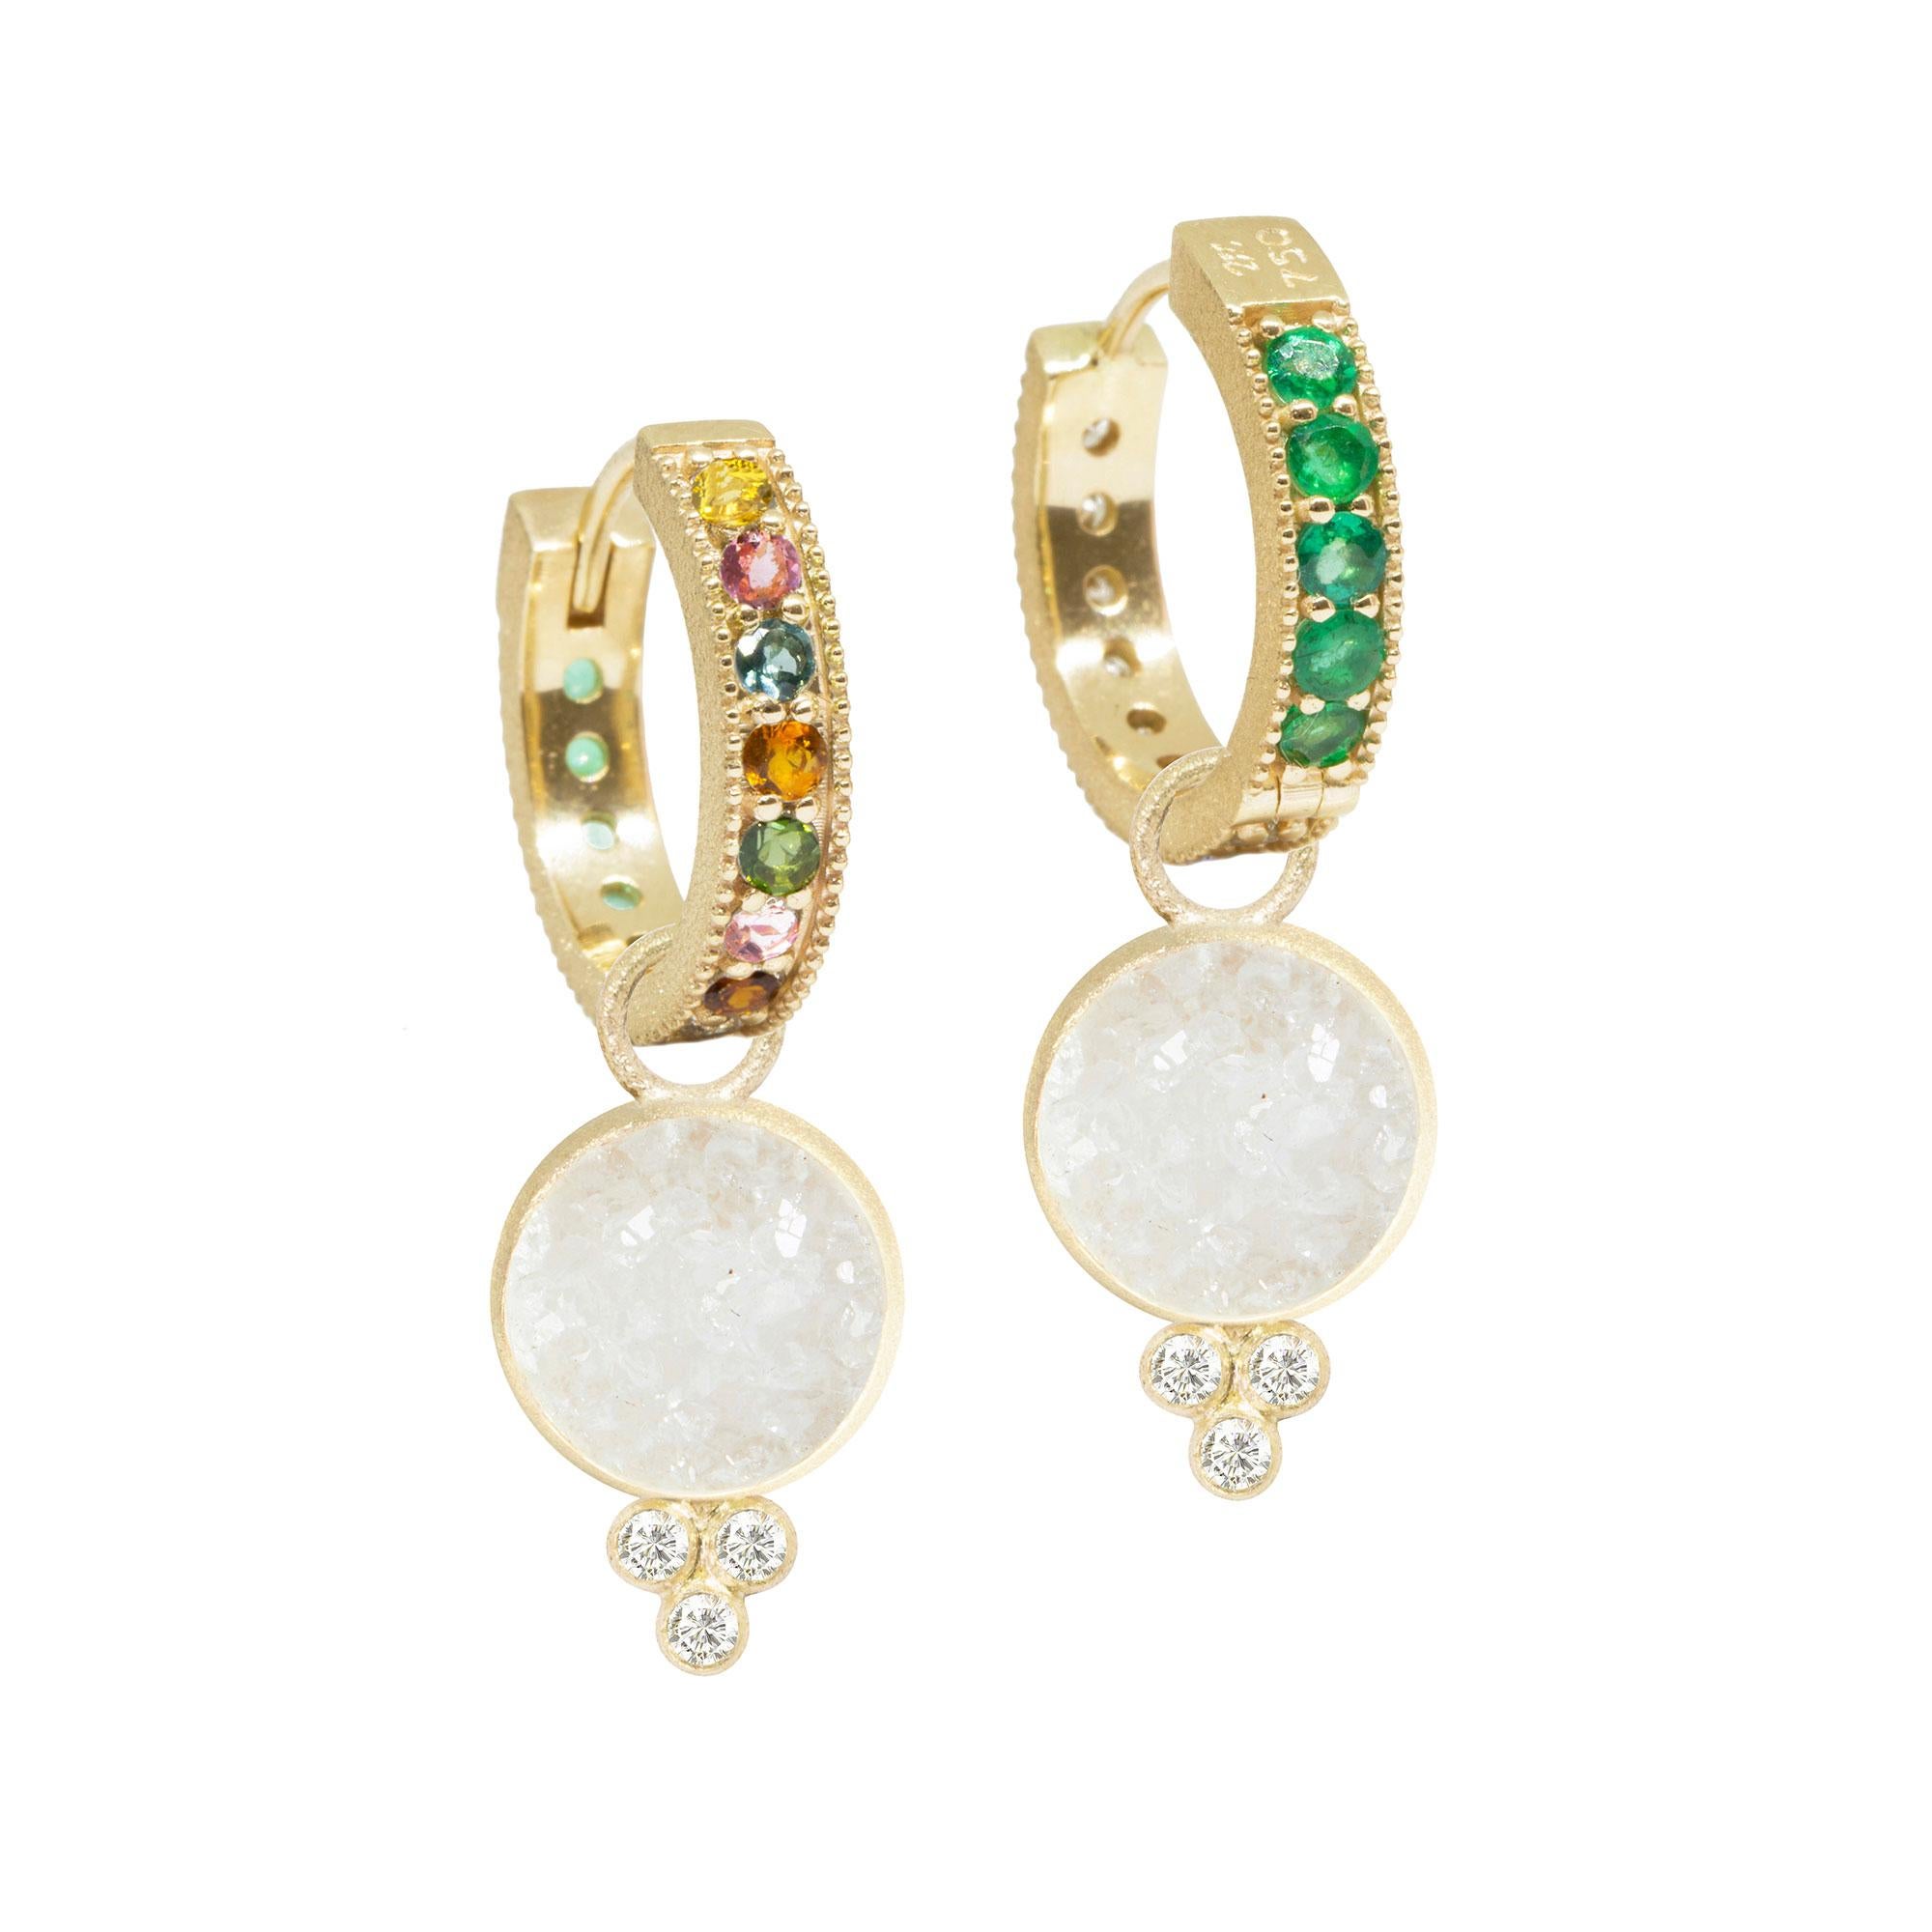 A Nina Nguyen classic to collect and treasure: Our diamond-accented Chloe Gold Charms are designed with white druzy rimmed in gold. They pair with any of our hoops and mix well with other styles.

Nina Nguyen Design's patent-pending earrings have an